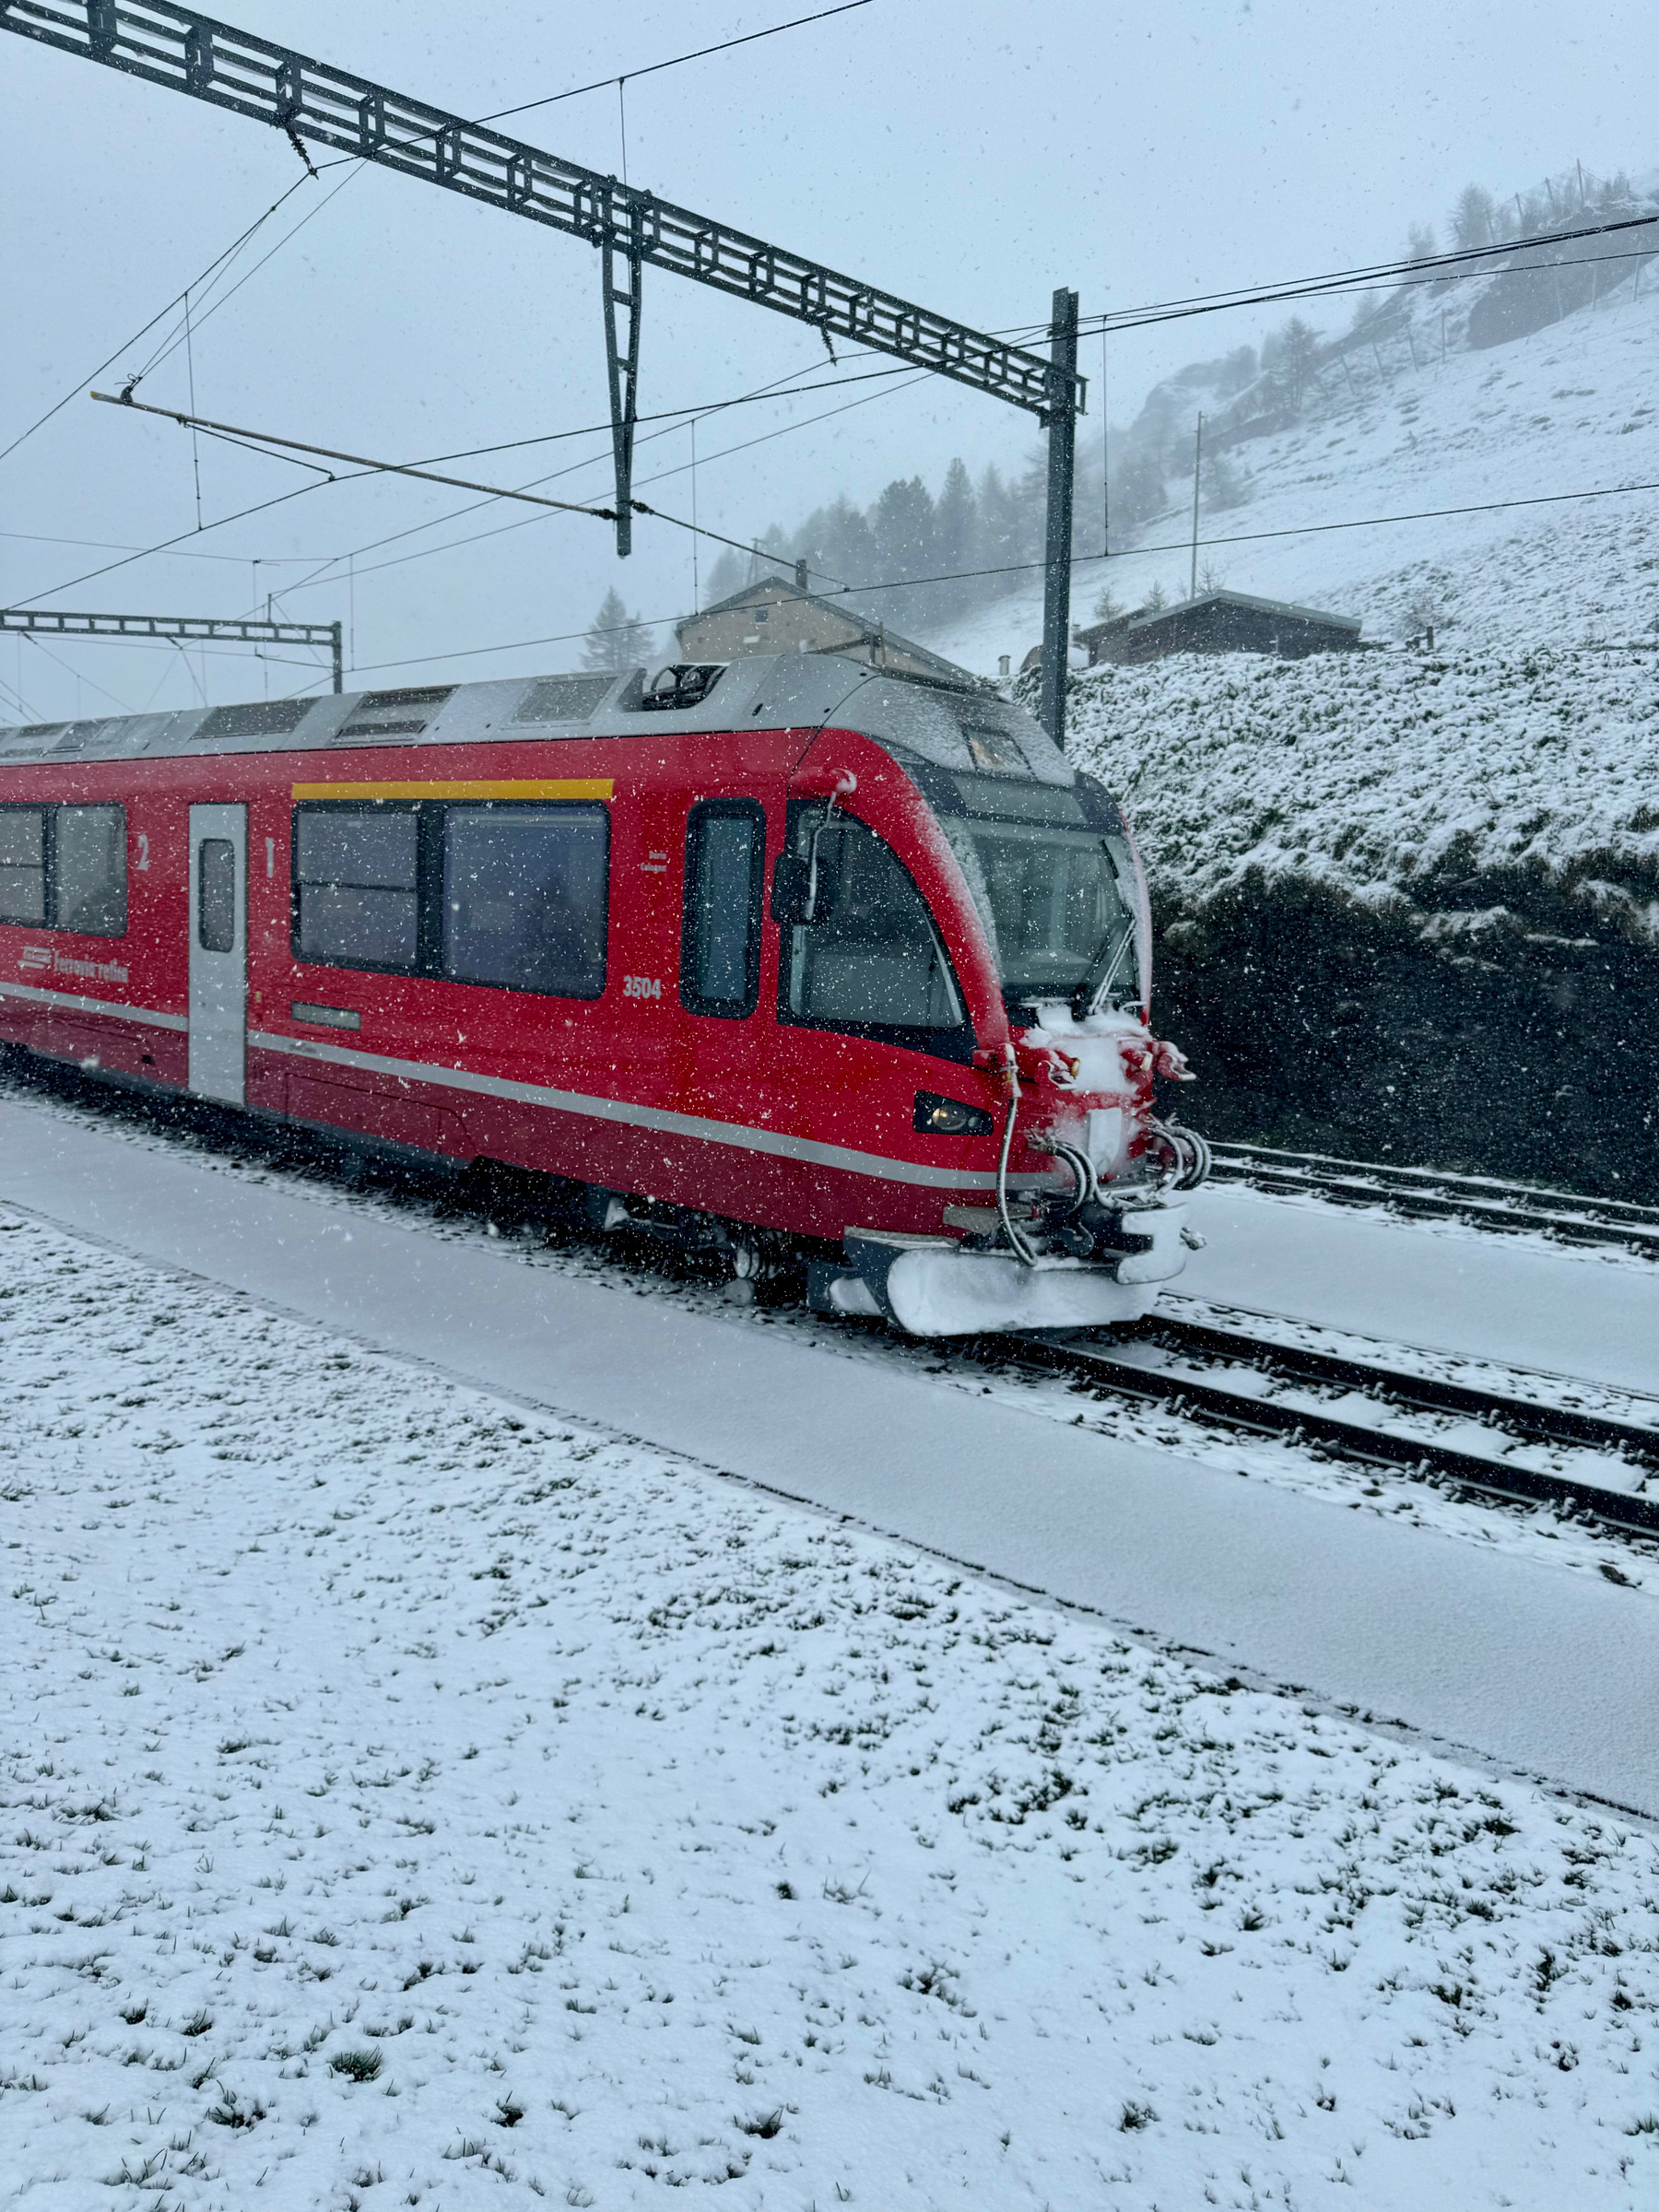 A red train is traveling through a snowy landscape. The tracks and the surrounding area are covered with snow. Overhead, electric lines span above the train, and a hill with some buildings is visible in the background under a light snowfall.